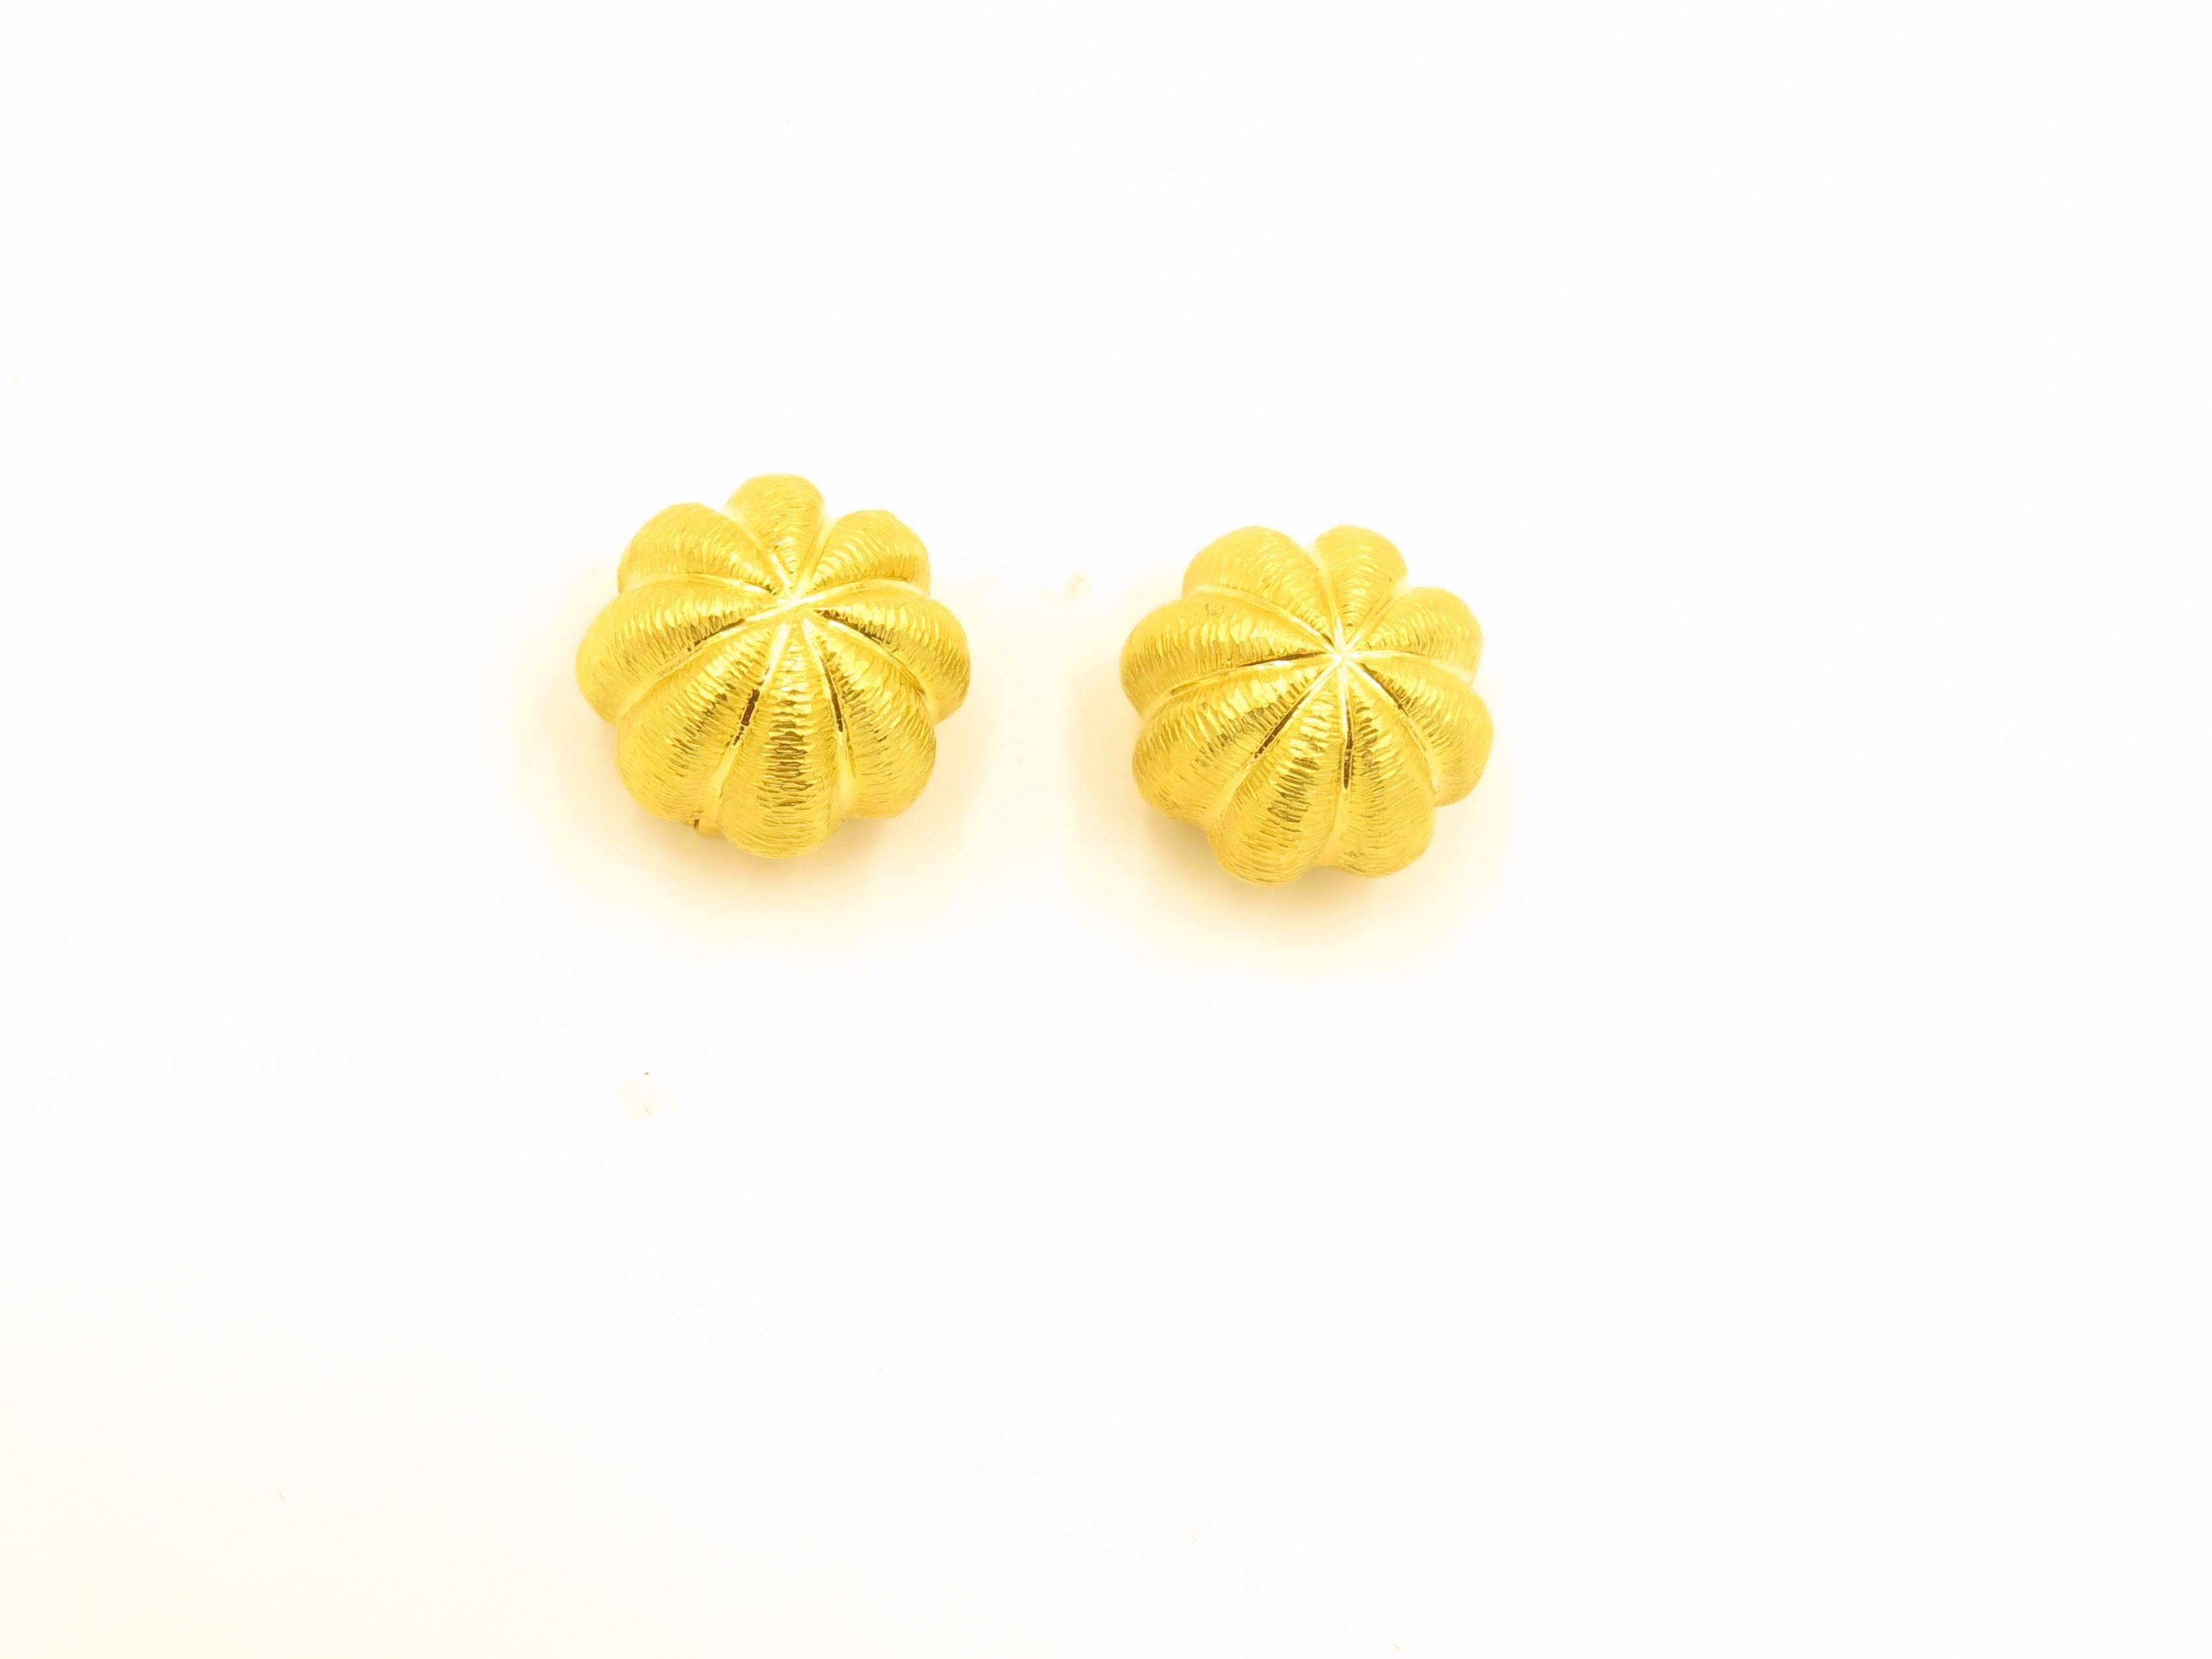 A pair of 18 karat yellow gold earrings, Tiffany & Co. Italy. Circa 2000's Designed as a textured gold sea urchin. Diameter is 3/4 inches. Gross weight is approximately 11.9 grams. Signed Tiffany & Co. 750, Italy.